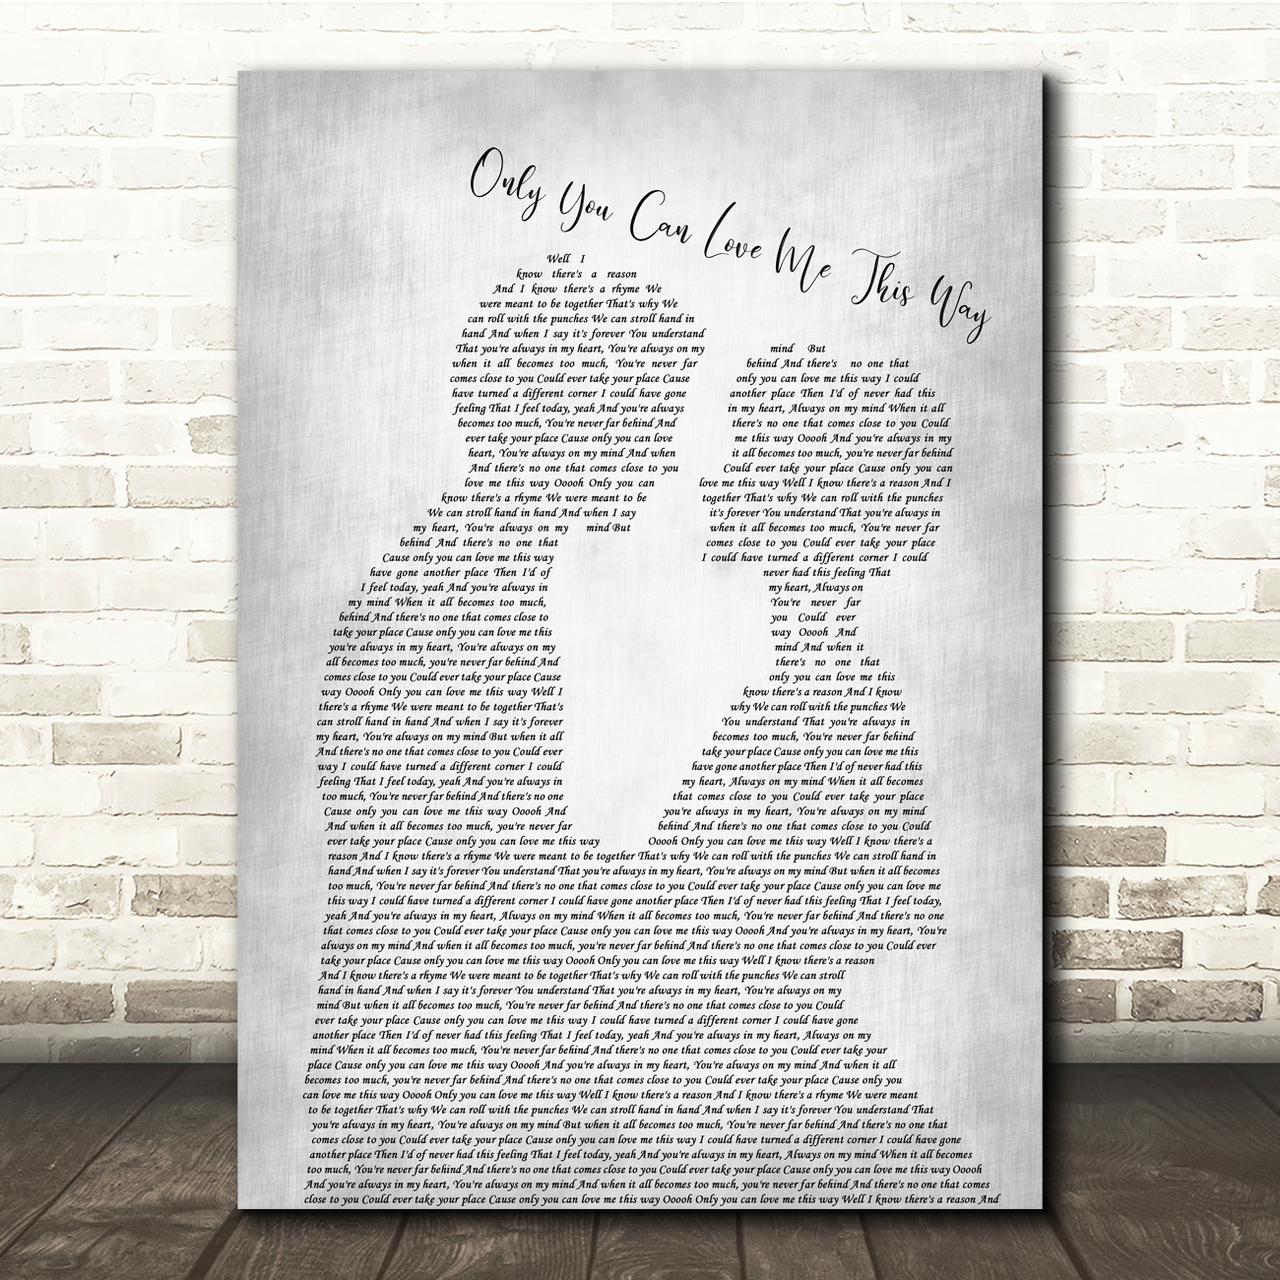 Keith Urban Only You Can Love Me This Way Man Lady Bride Groom Wedding Grey Song Lyric Quote Music Poster Print